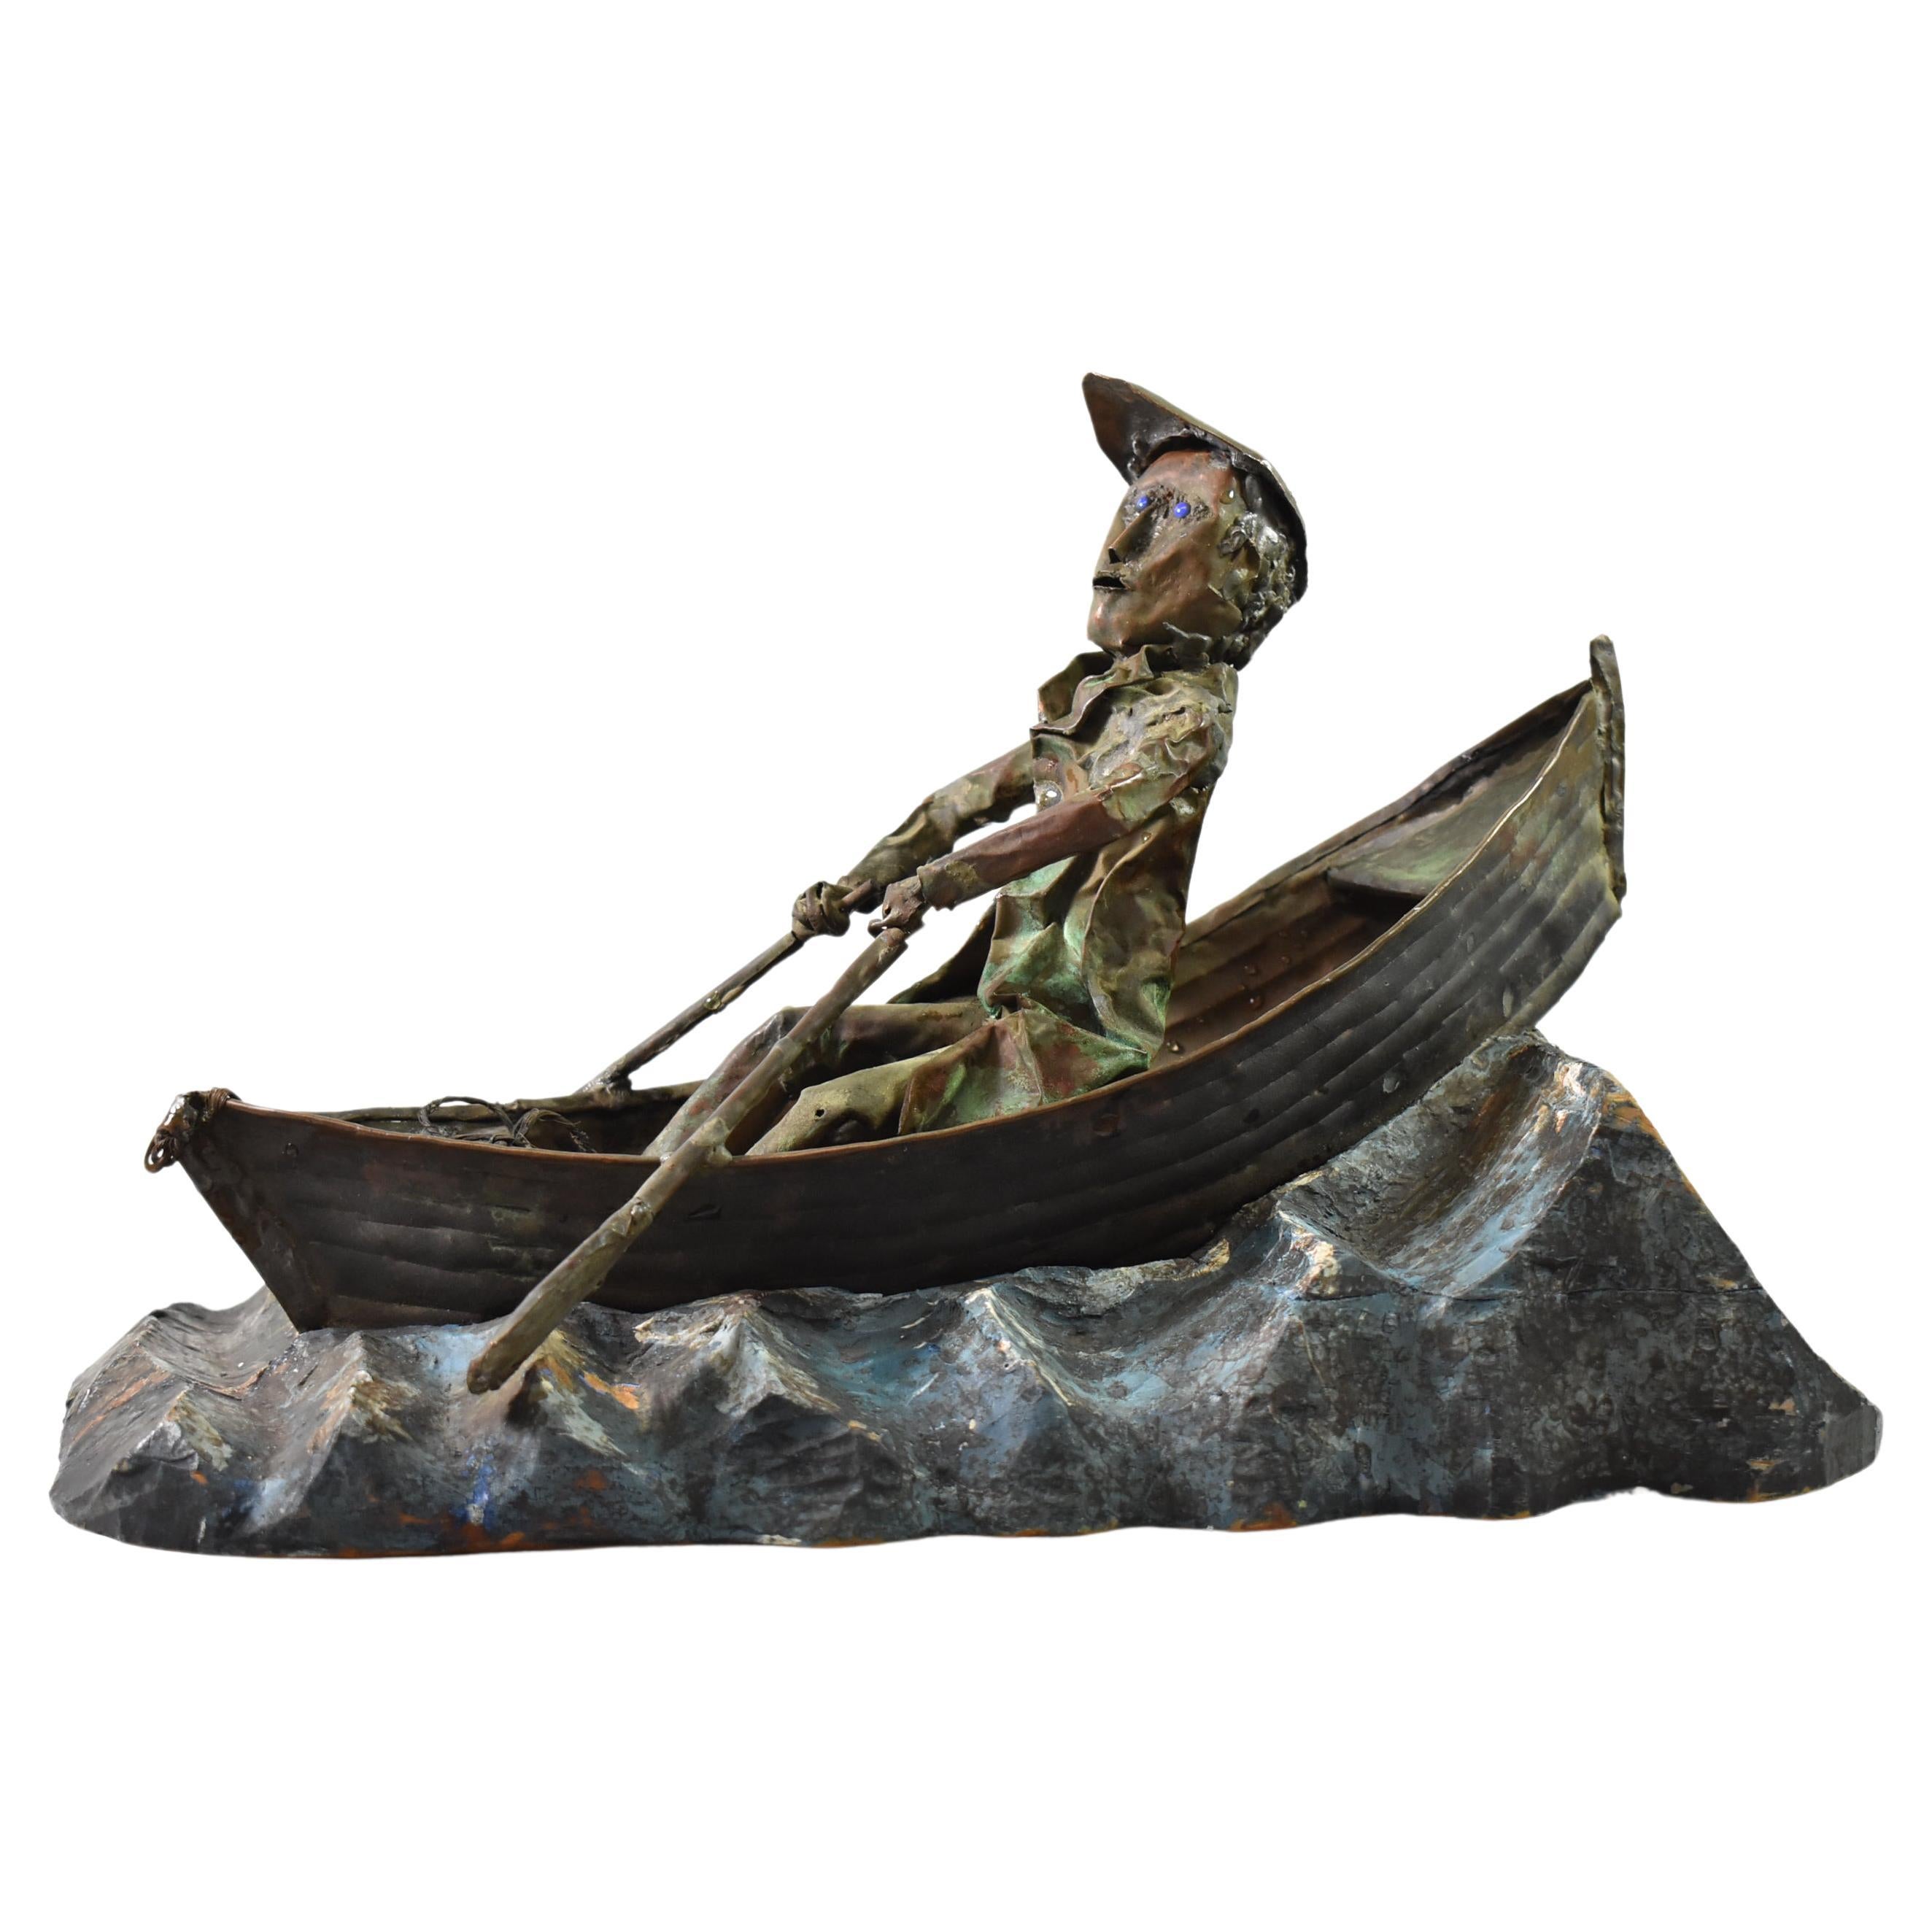 Folk Art Copper Sculpture Man In Row Boat By S.J. Rossbach Circa 1966 For Sale